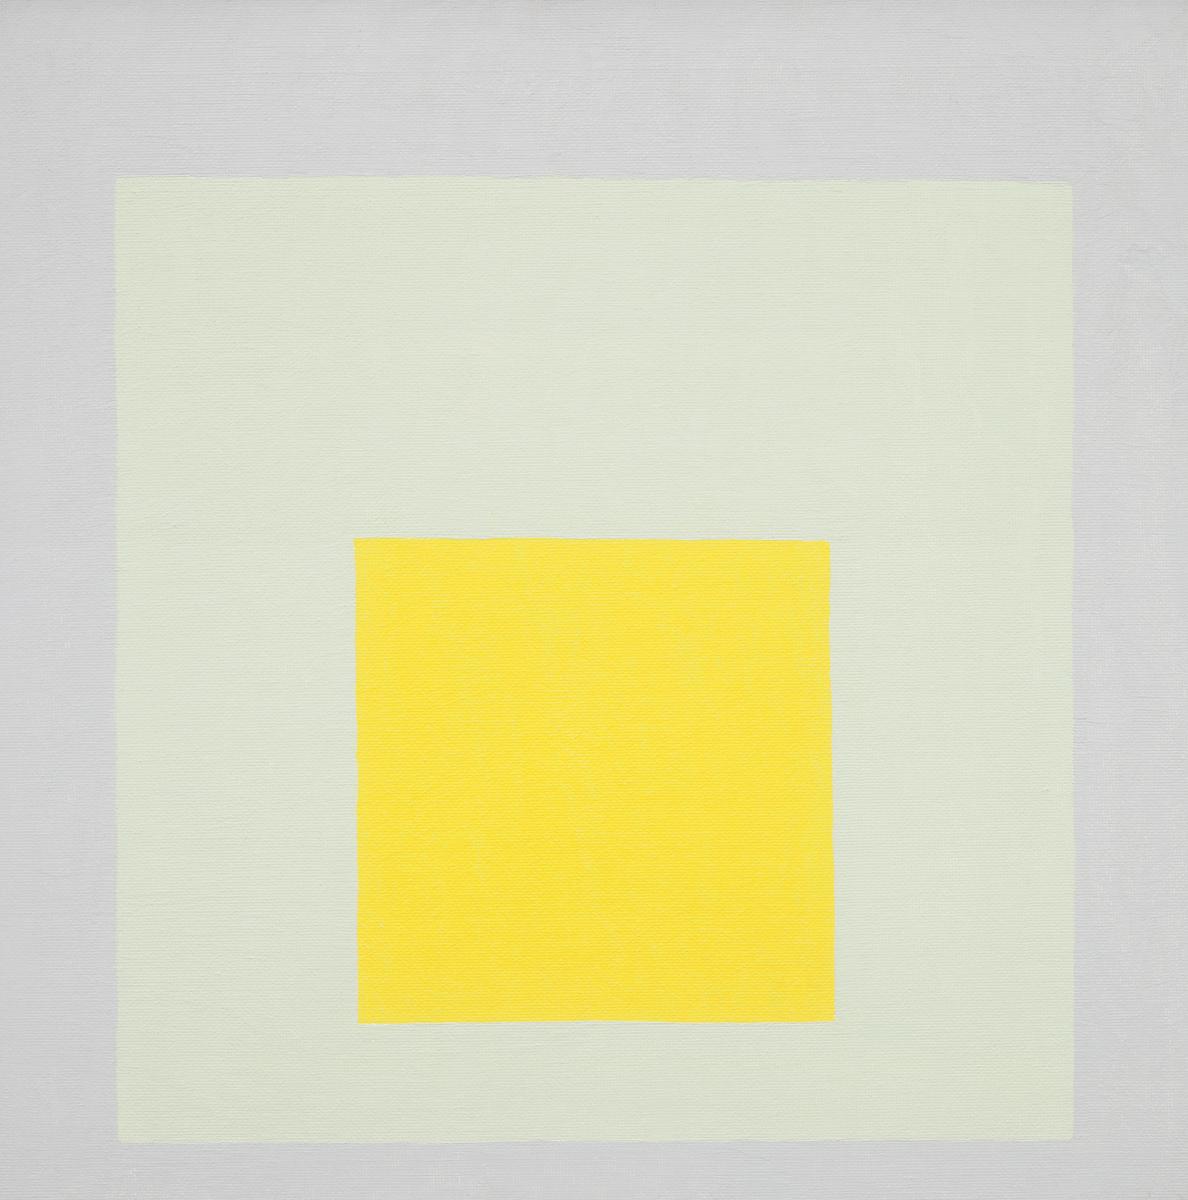 Josef Albers, Study for Homage to the Square: Impact, 1965. Oil on Masonite; 60.5 × 60.5cm. Courtesy The Josef Albers Museum Quadrat Bottrop. © 2020 The Josef And Anni Albers Foundation/Artists Rights Society (ARS), New York/DACS, London